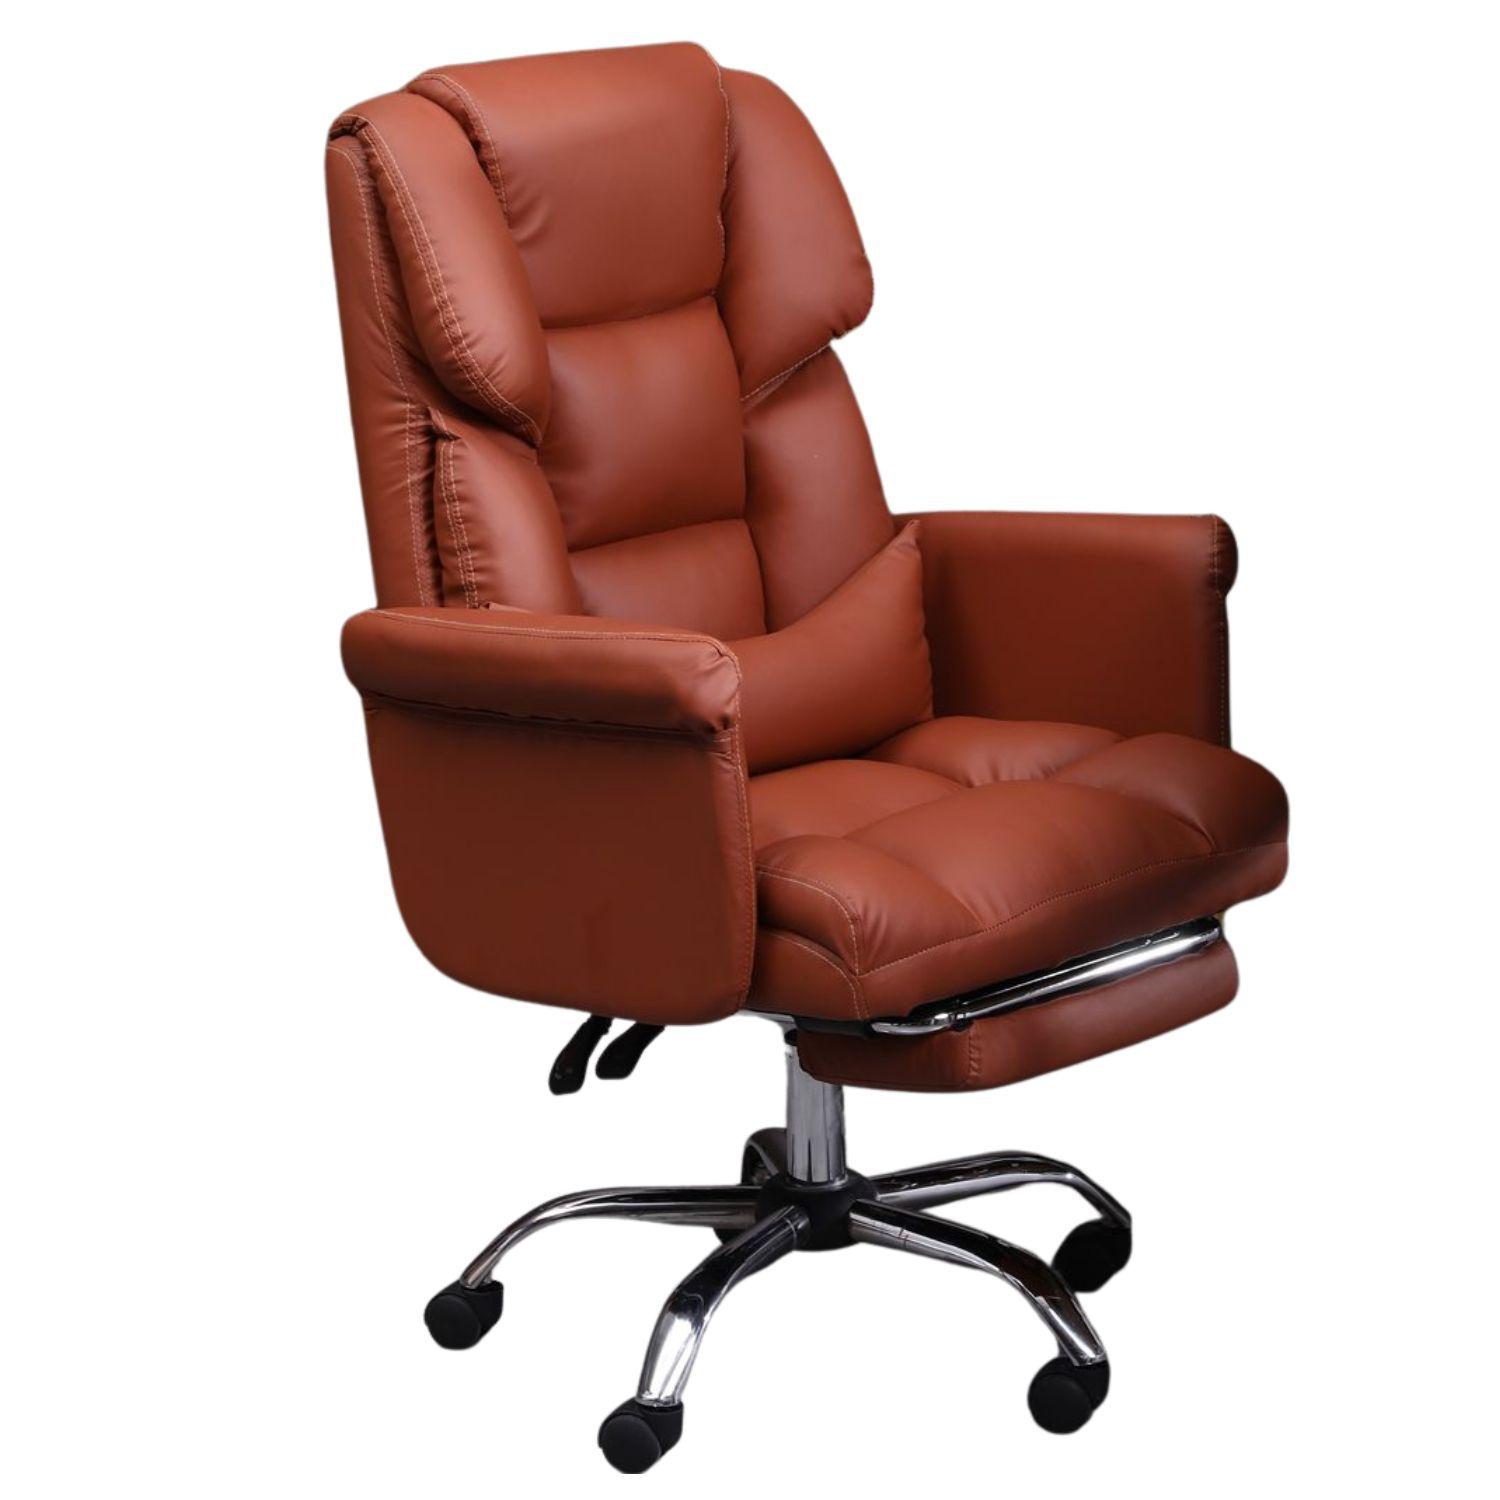 Premium Elegance Office Chair with Footrest - Brown Leather